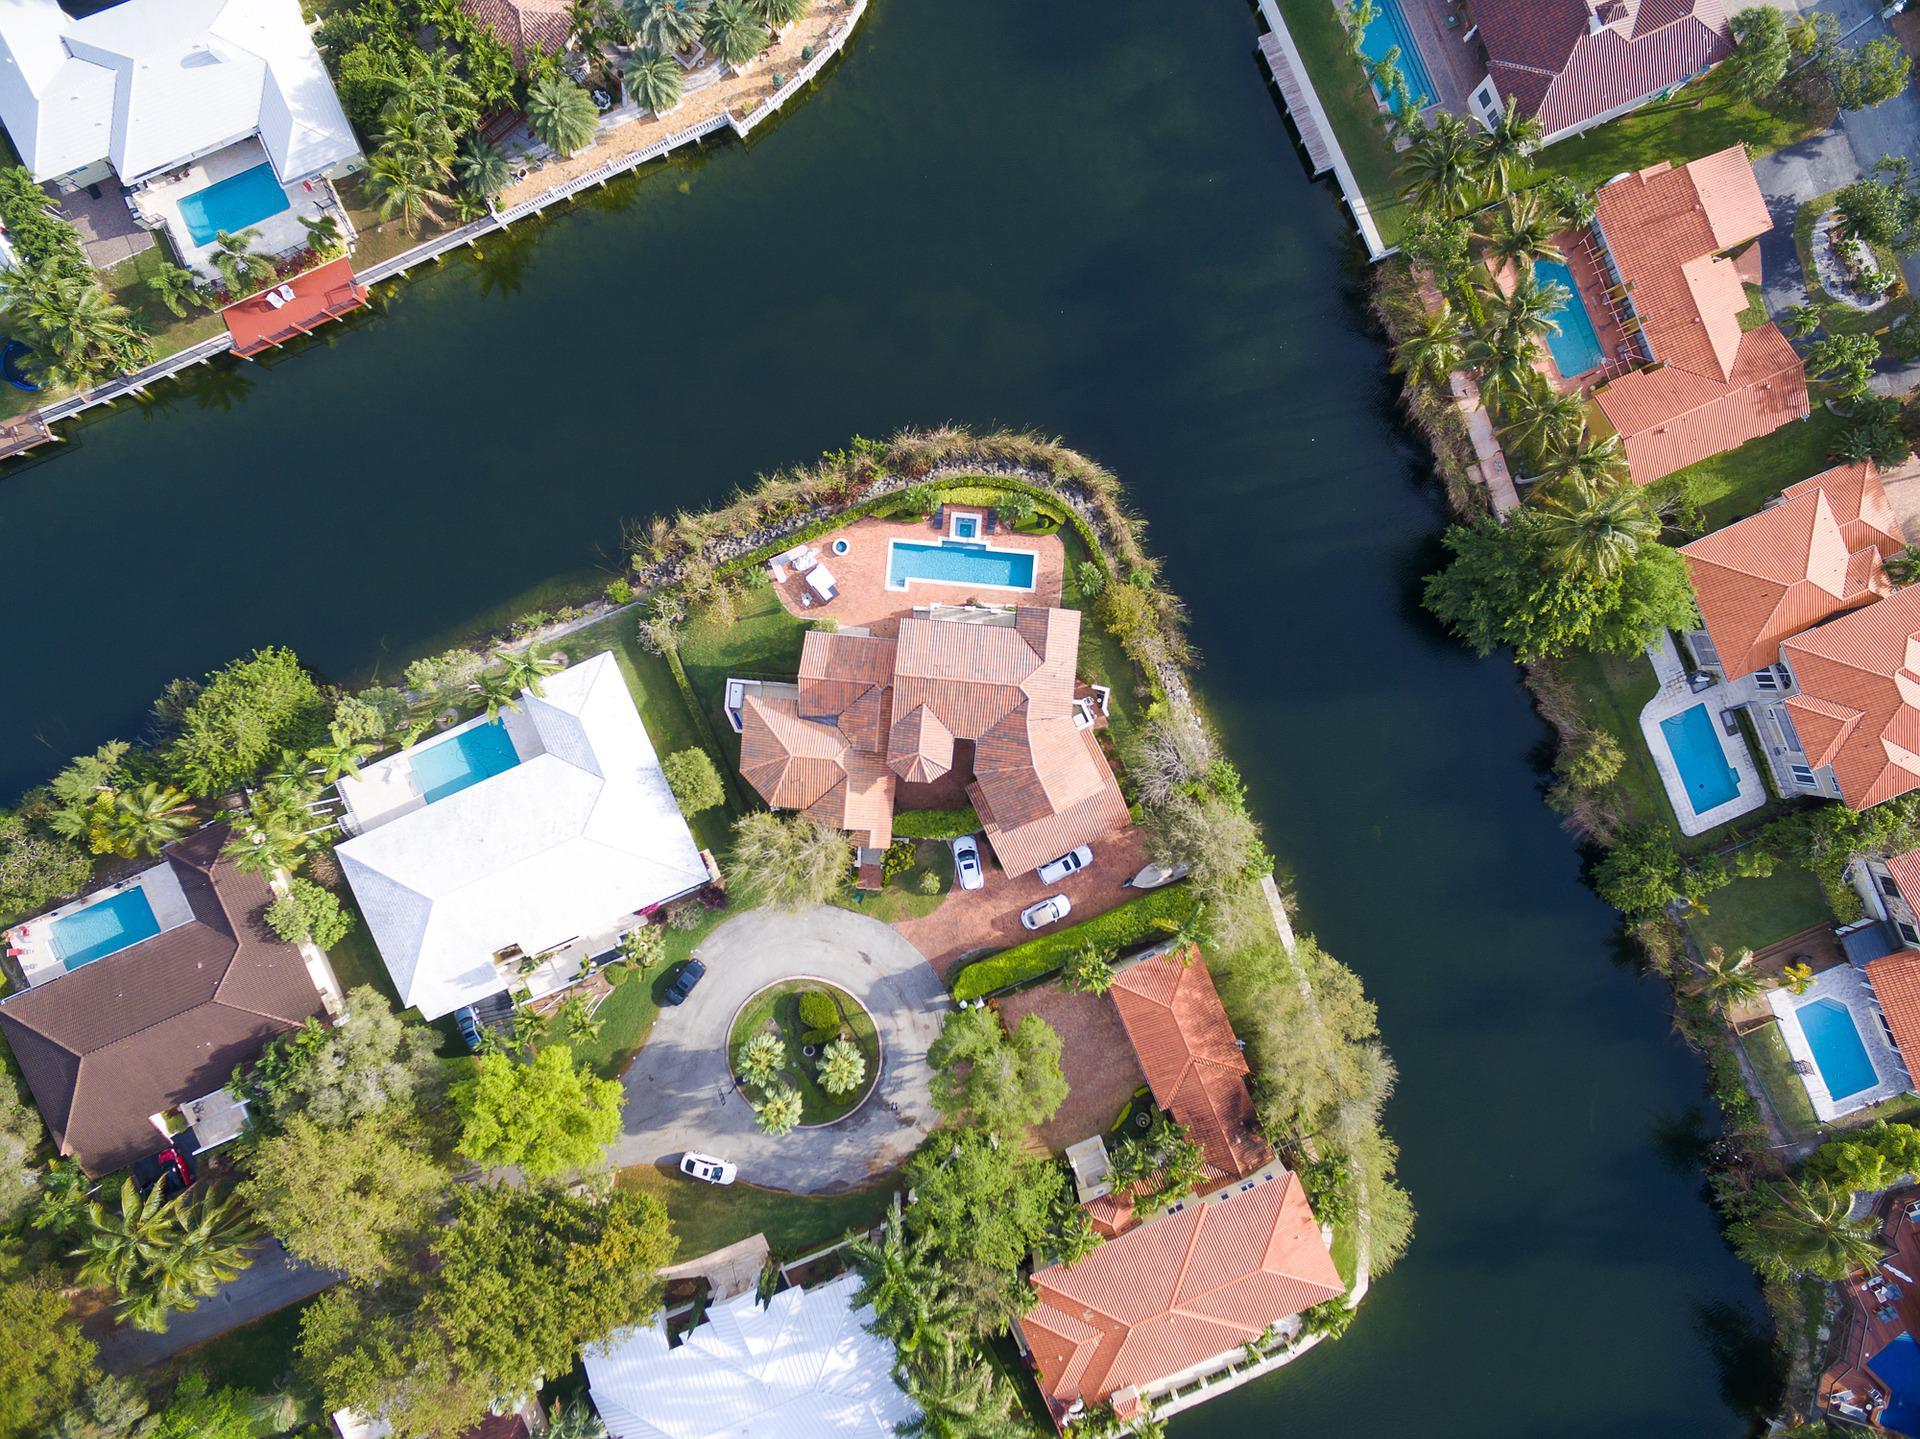 Birds-eye view of houses in Cape Coral, Florida